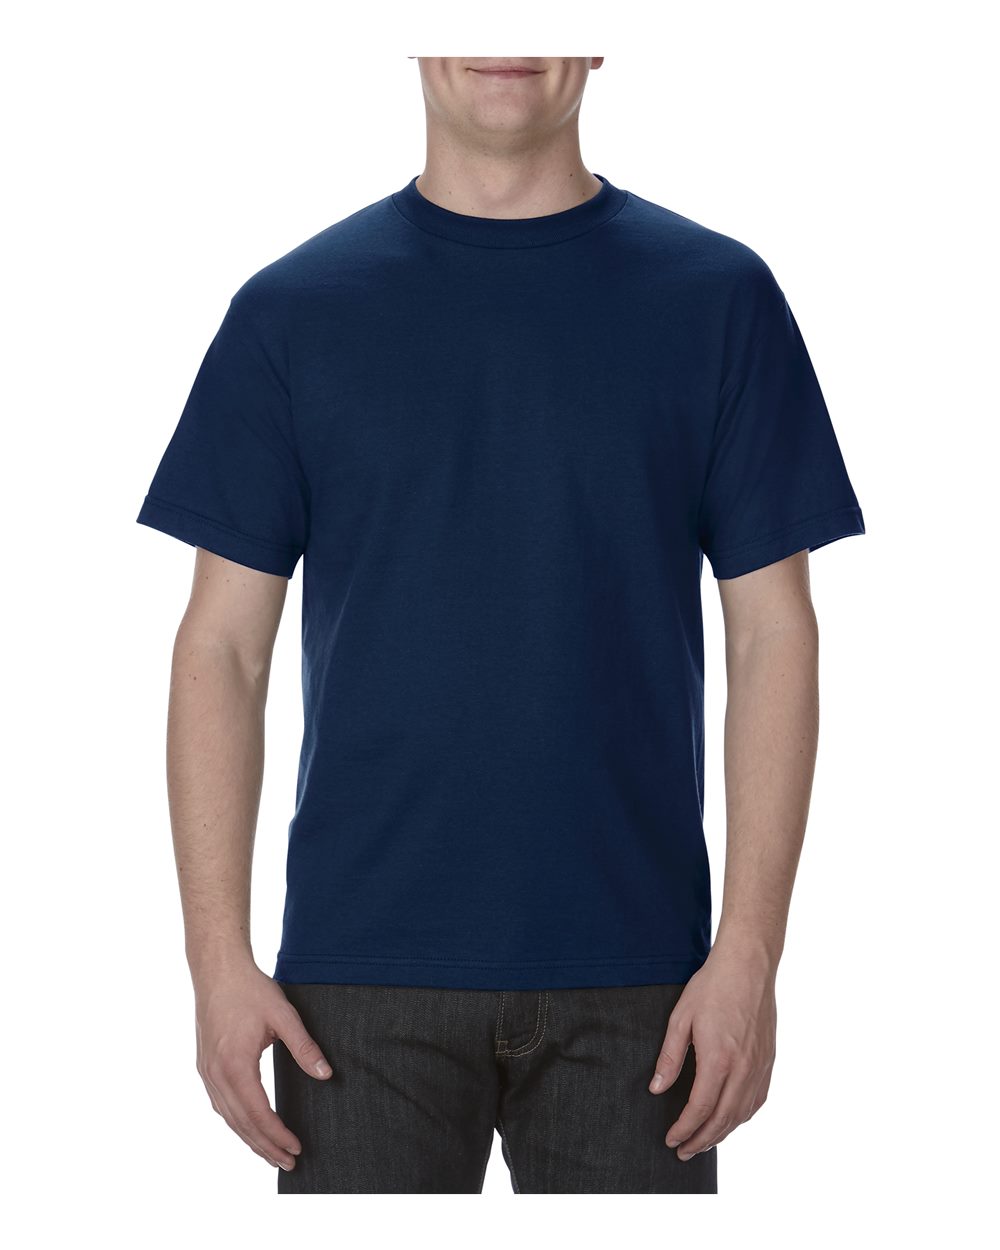 Alstyle 1301 - Classic Short Sleeve Tee $4.32 - Gifts 10 and Under